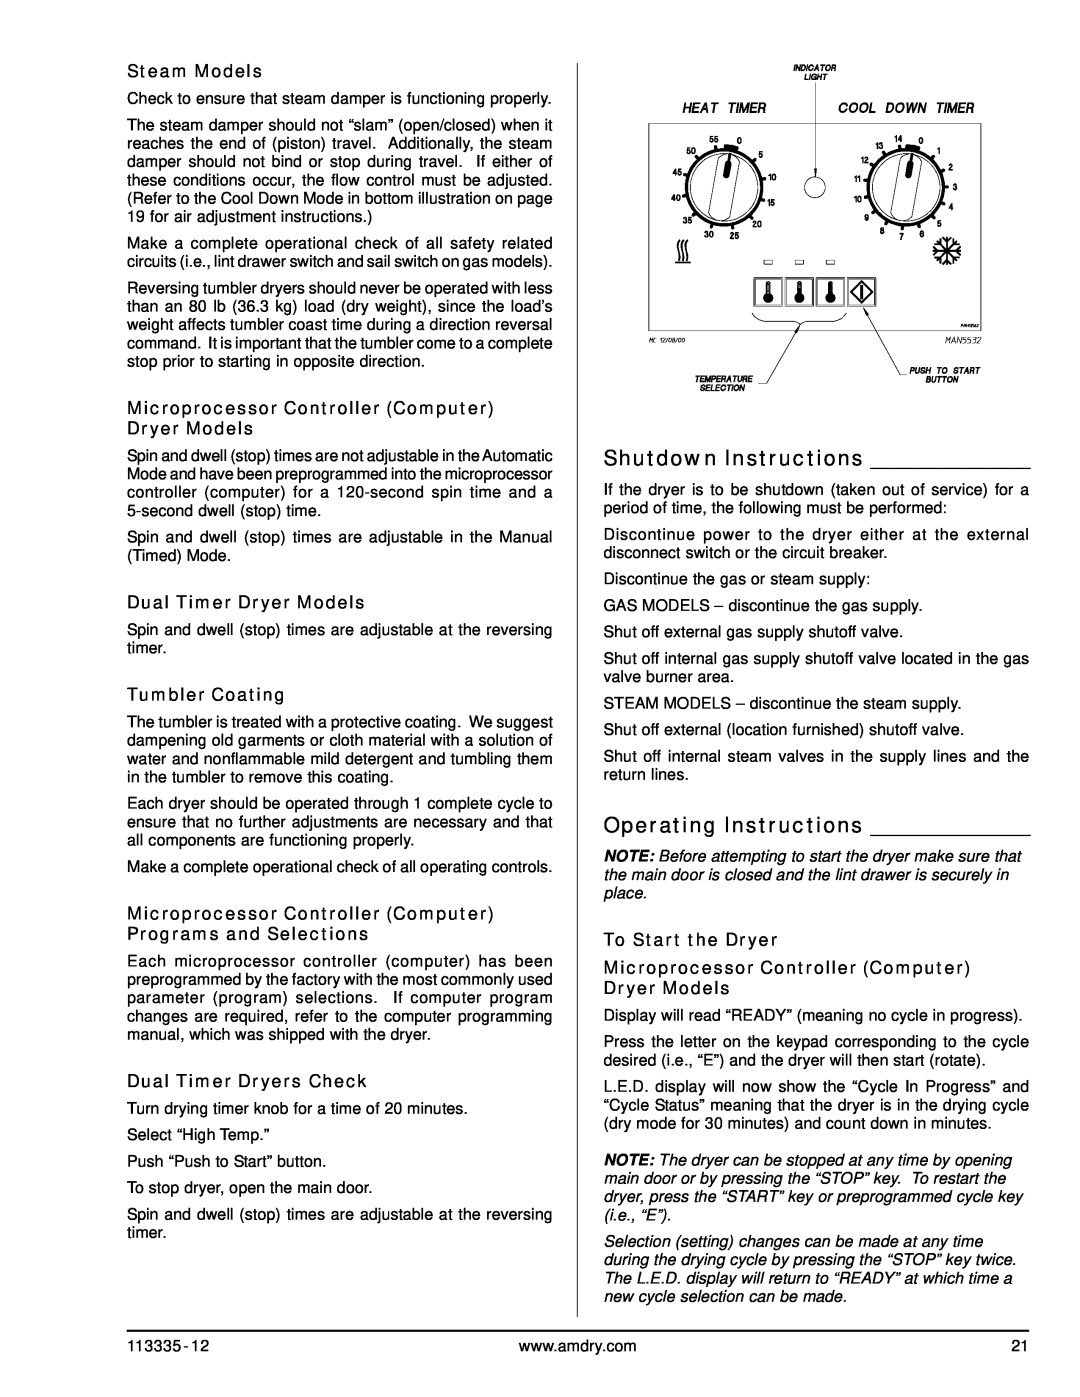 American Dryer Corp ML-130DR Shutdown Instructions, Operating Instructions, Steam Models, Dual Timer Dryer Models 